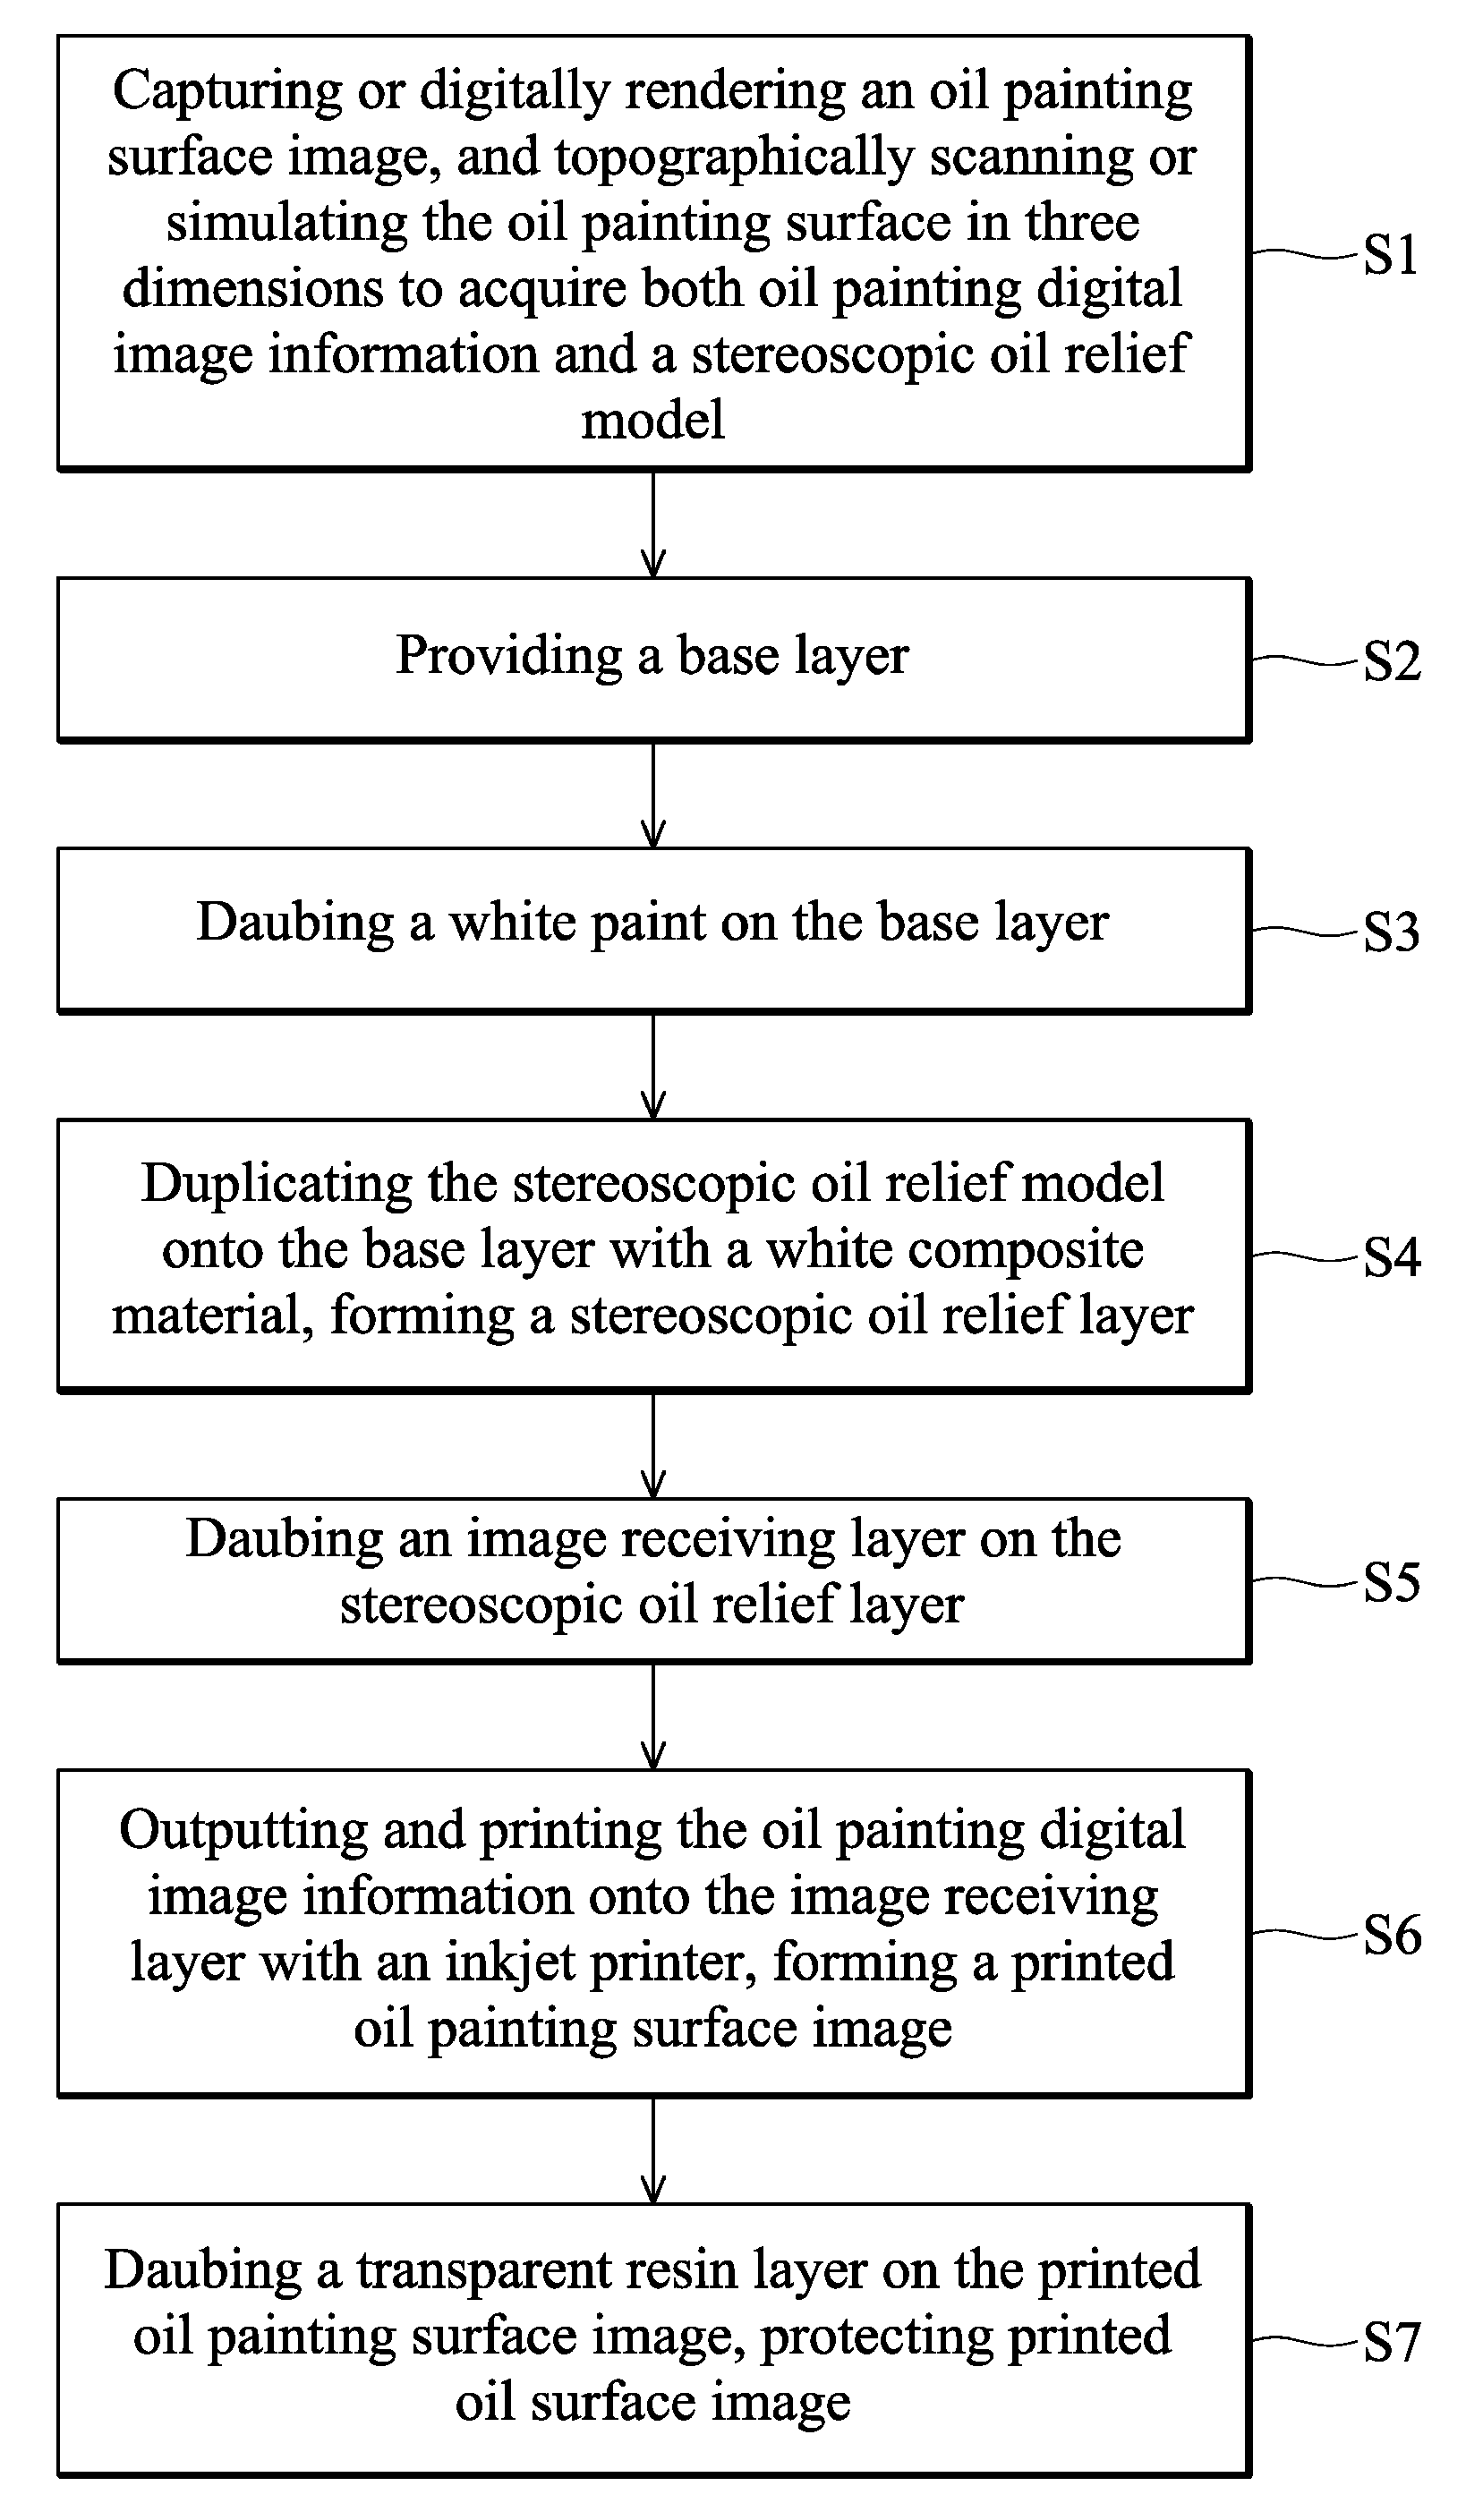 Method for simulating, fabricating, or duplicating an oil painting